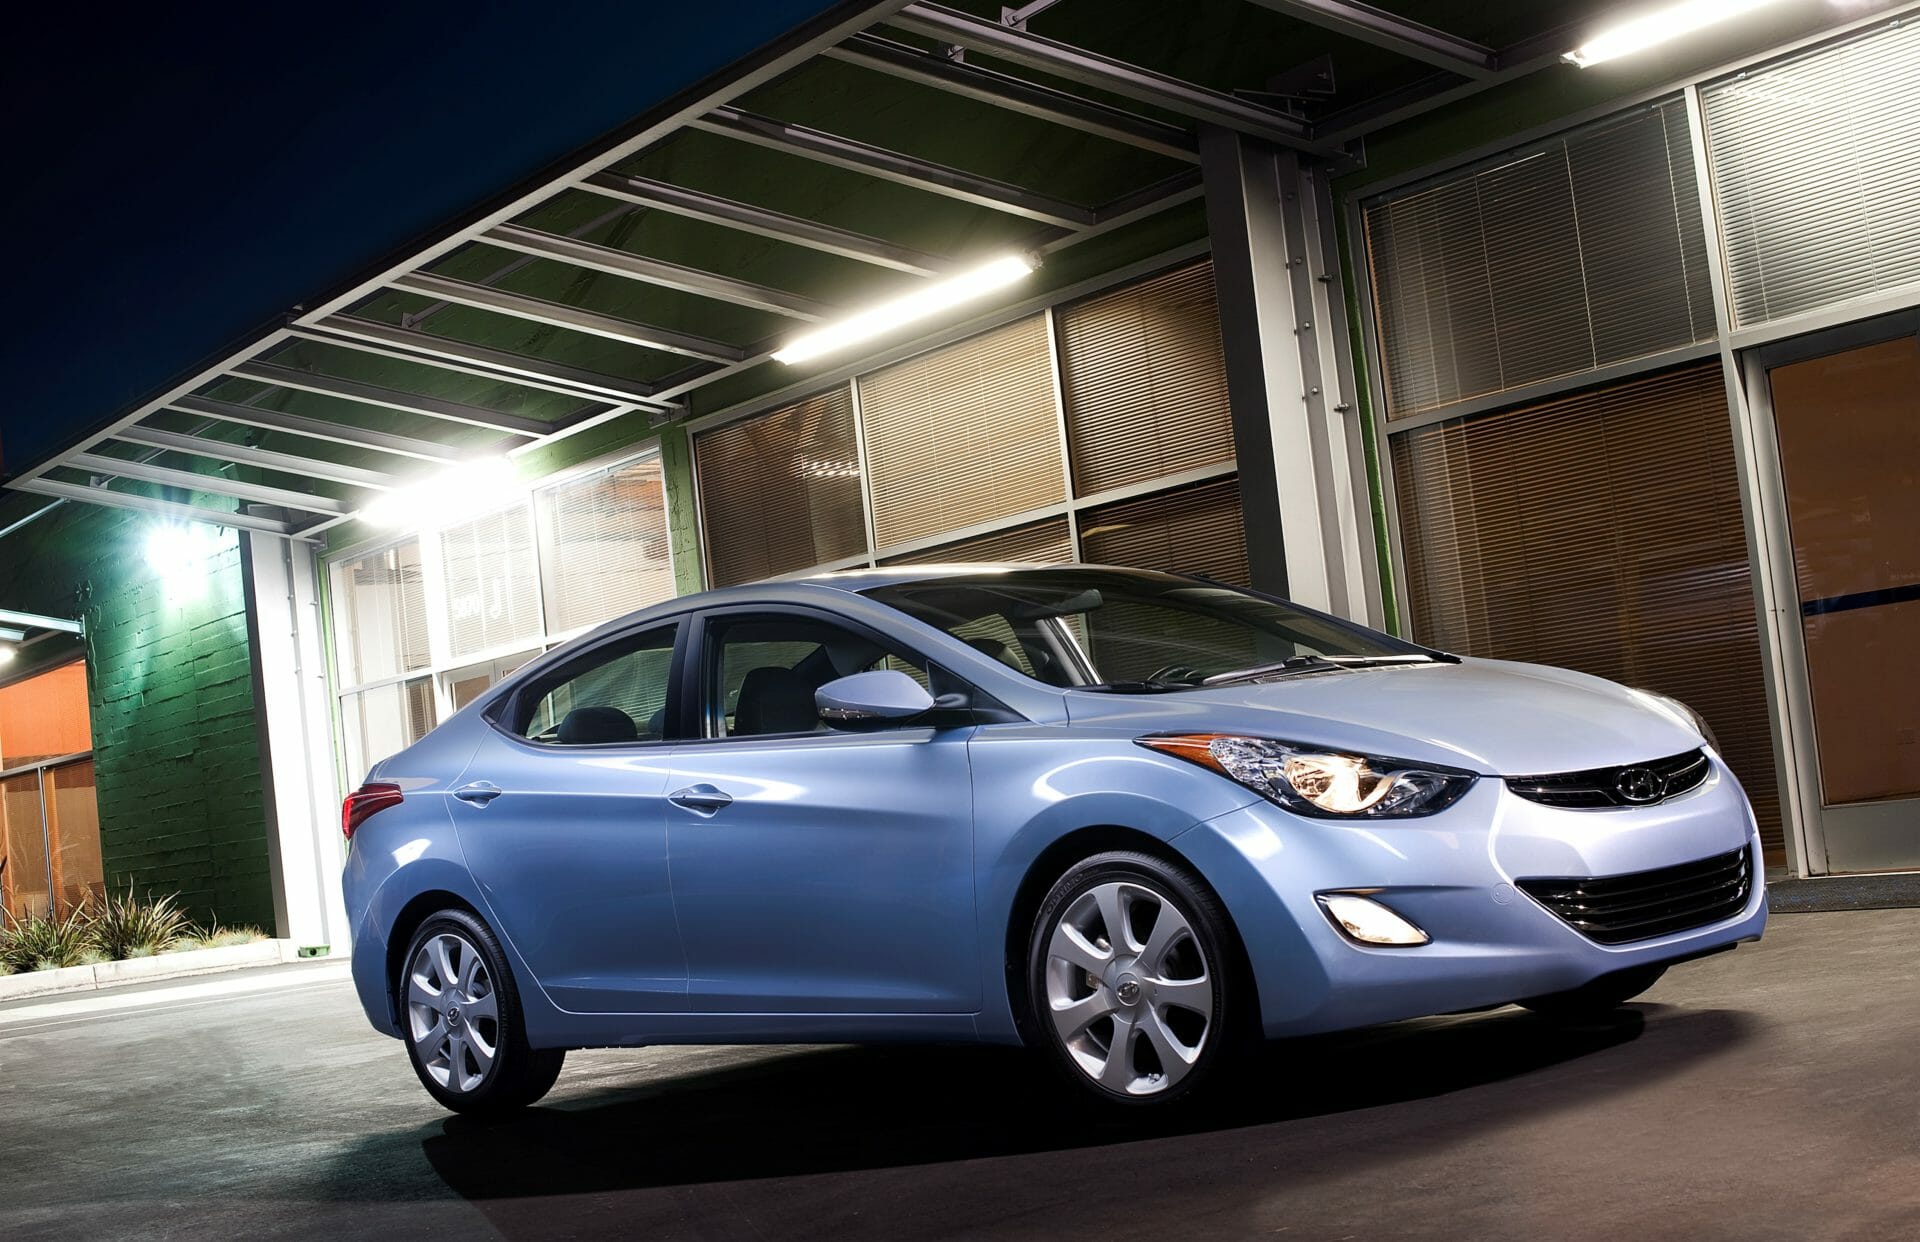 2011 Hyundai Elantra Review: A Redesigned Compact Daily Driver With Good Technology